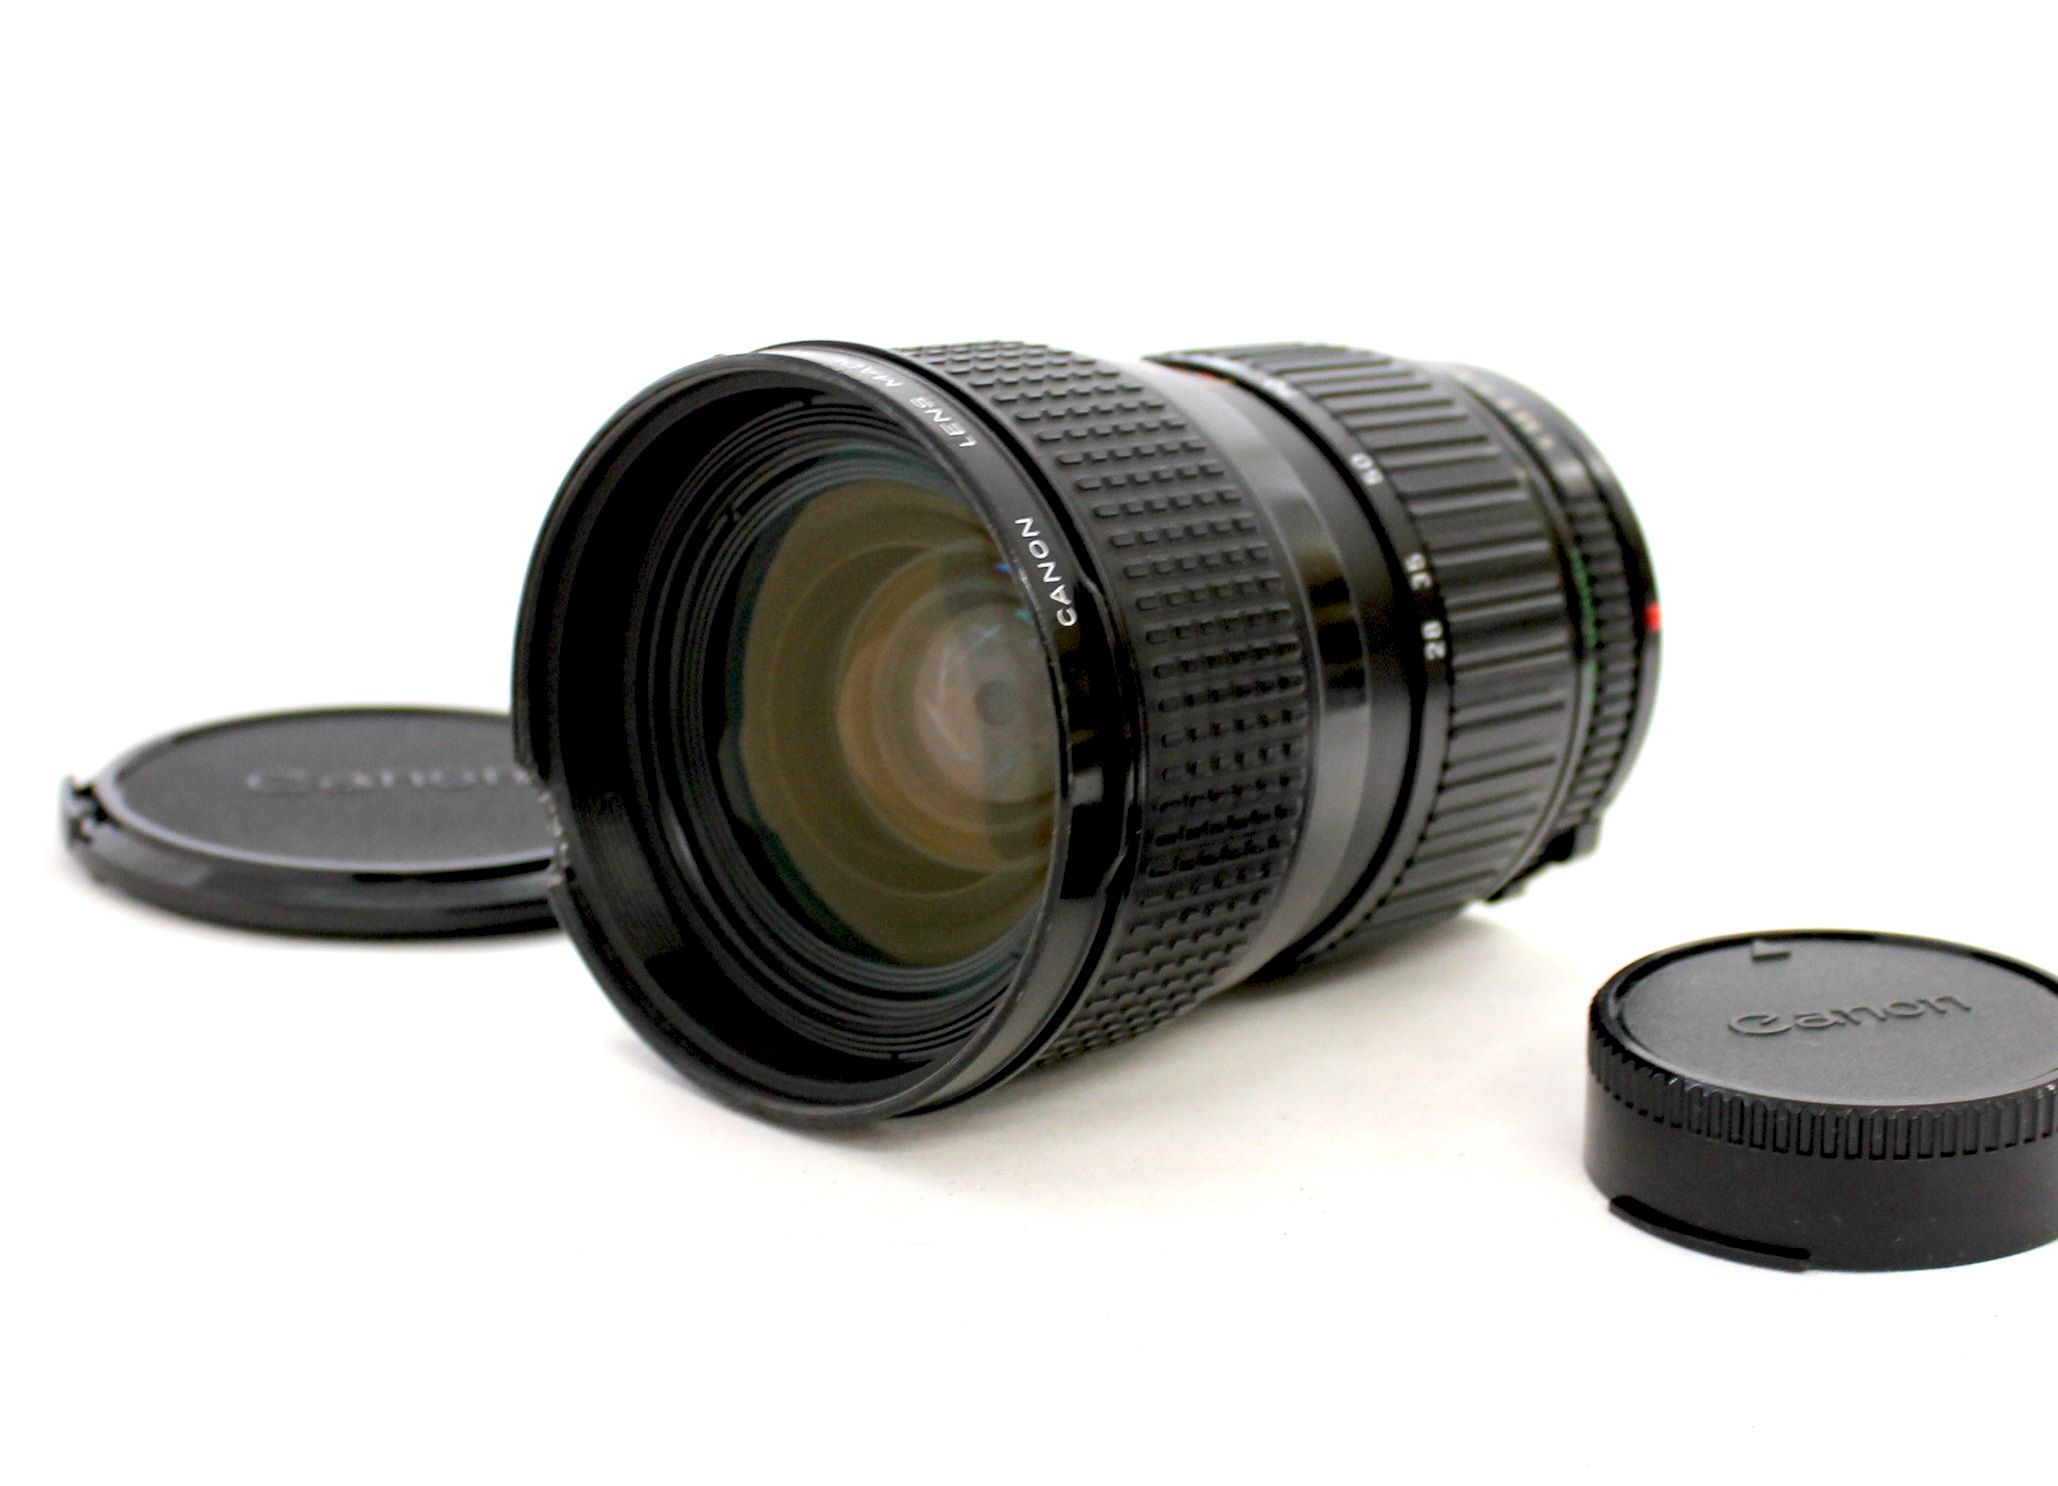 Japan Used Camera Shop | [Excellent++] Canon New FD NFD 28-85mm F4 Macro Zoom Lens from Japan